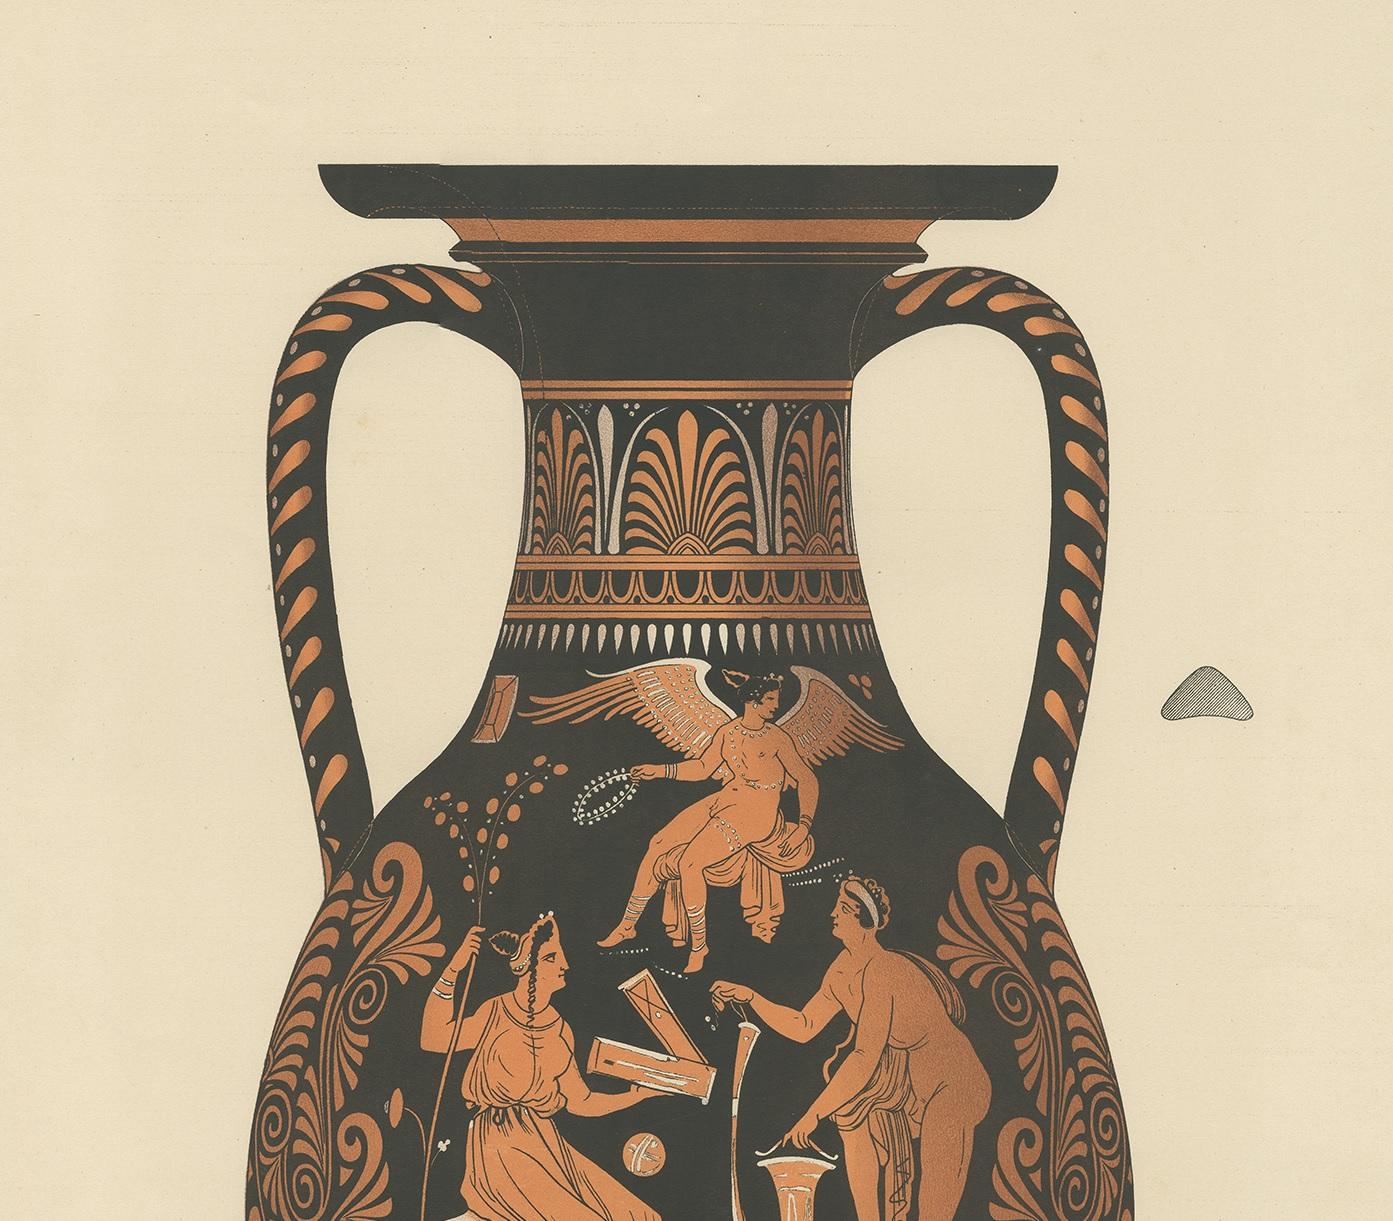 Antique print titled 'Amphora'. Color-printed large lithograph by Ernst Wasmuth depicting a Greek Amphora. This print originates from 'Griechische Keramik' by A. Genick. Albert Genick, an architect by training, was one of the leading German scholars